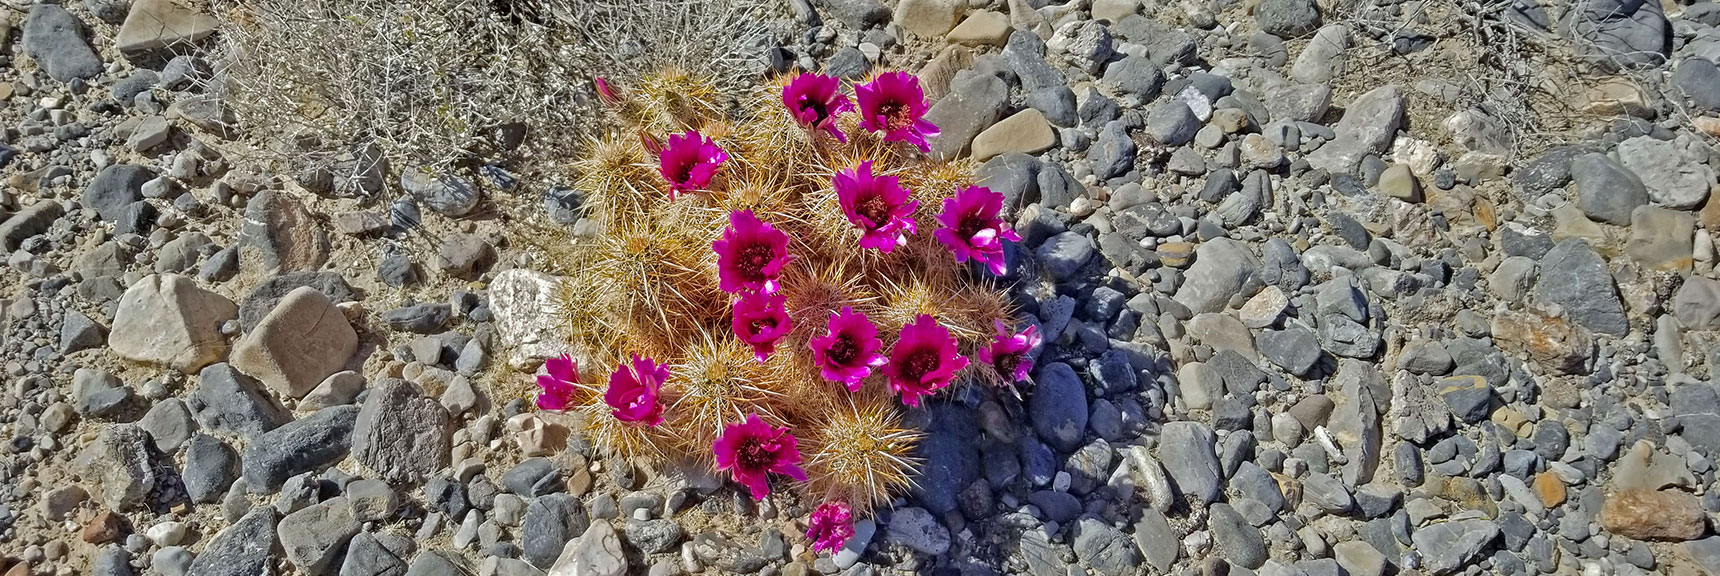 Blooming Early April Cactus Near Mormon Well Road | Fossil Ridge End to End | Sheep Range | Desert National Wildlife Refuge, Nevada